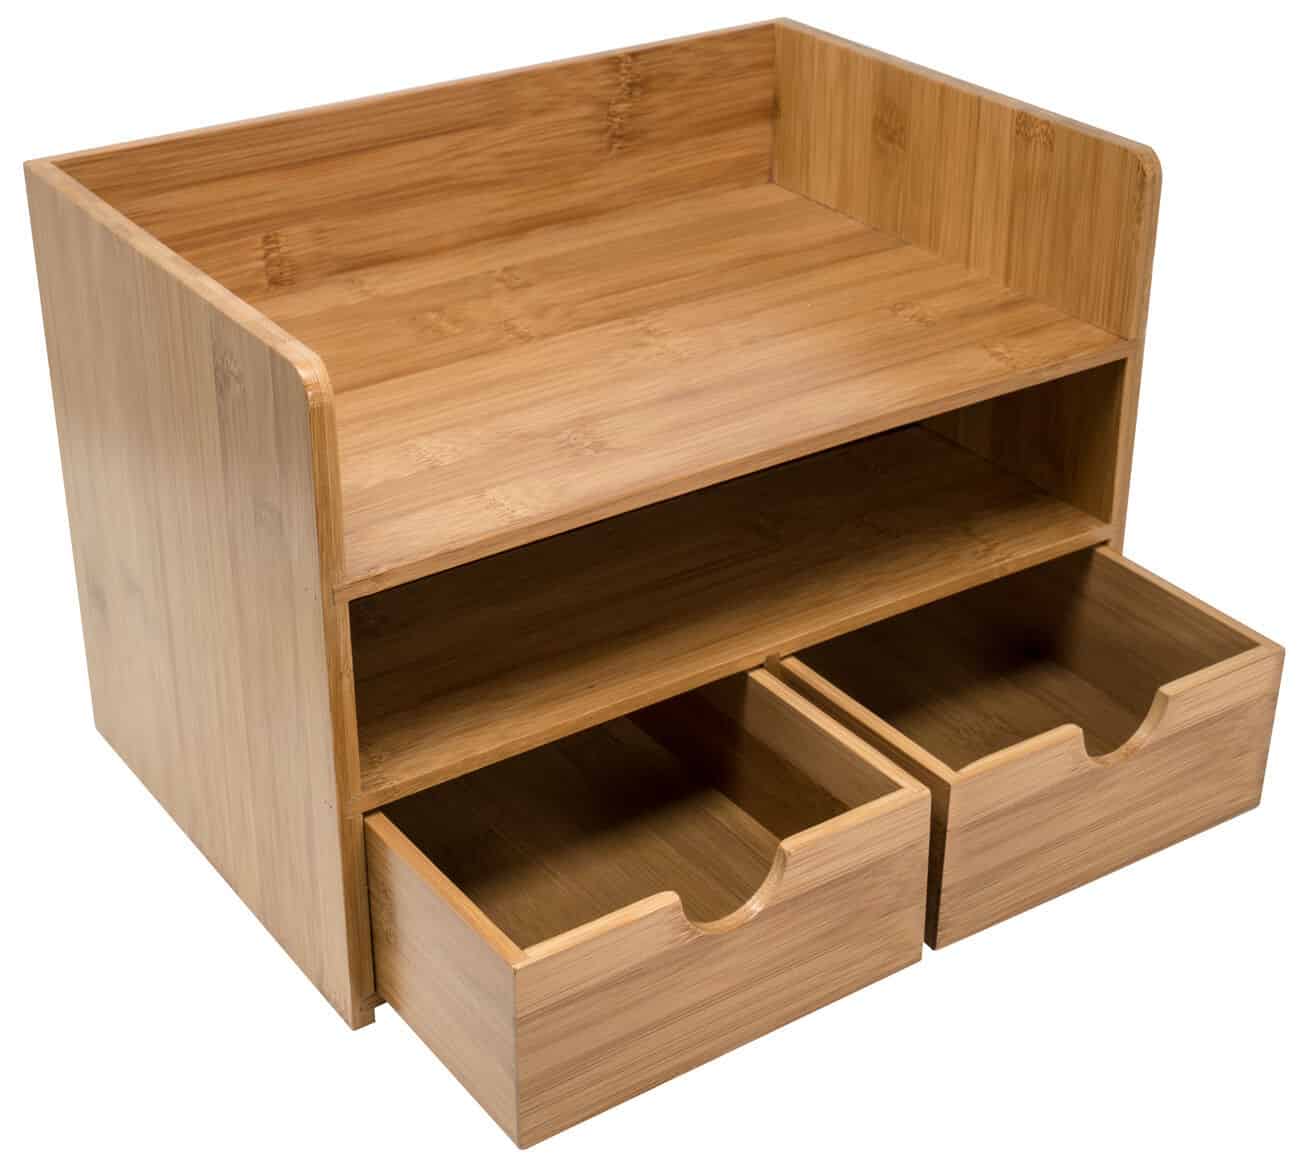 A wooden desk with two drawers.